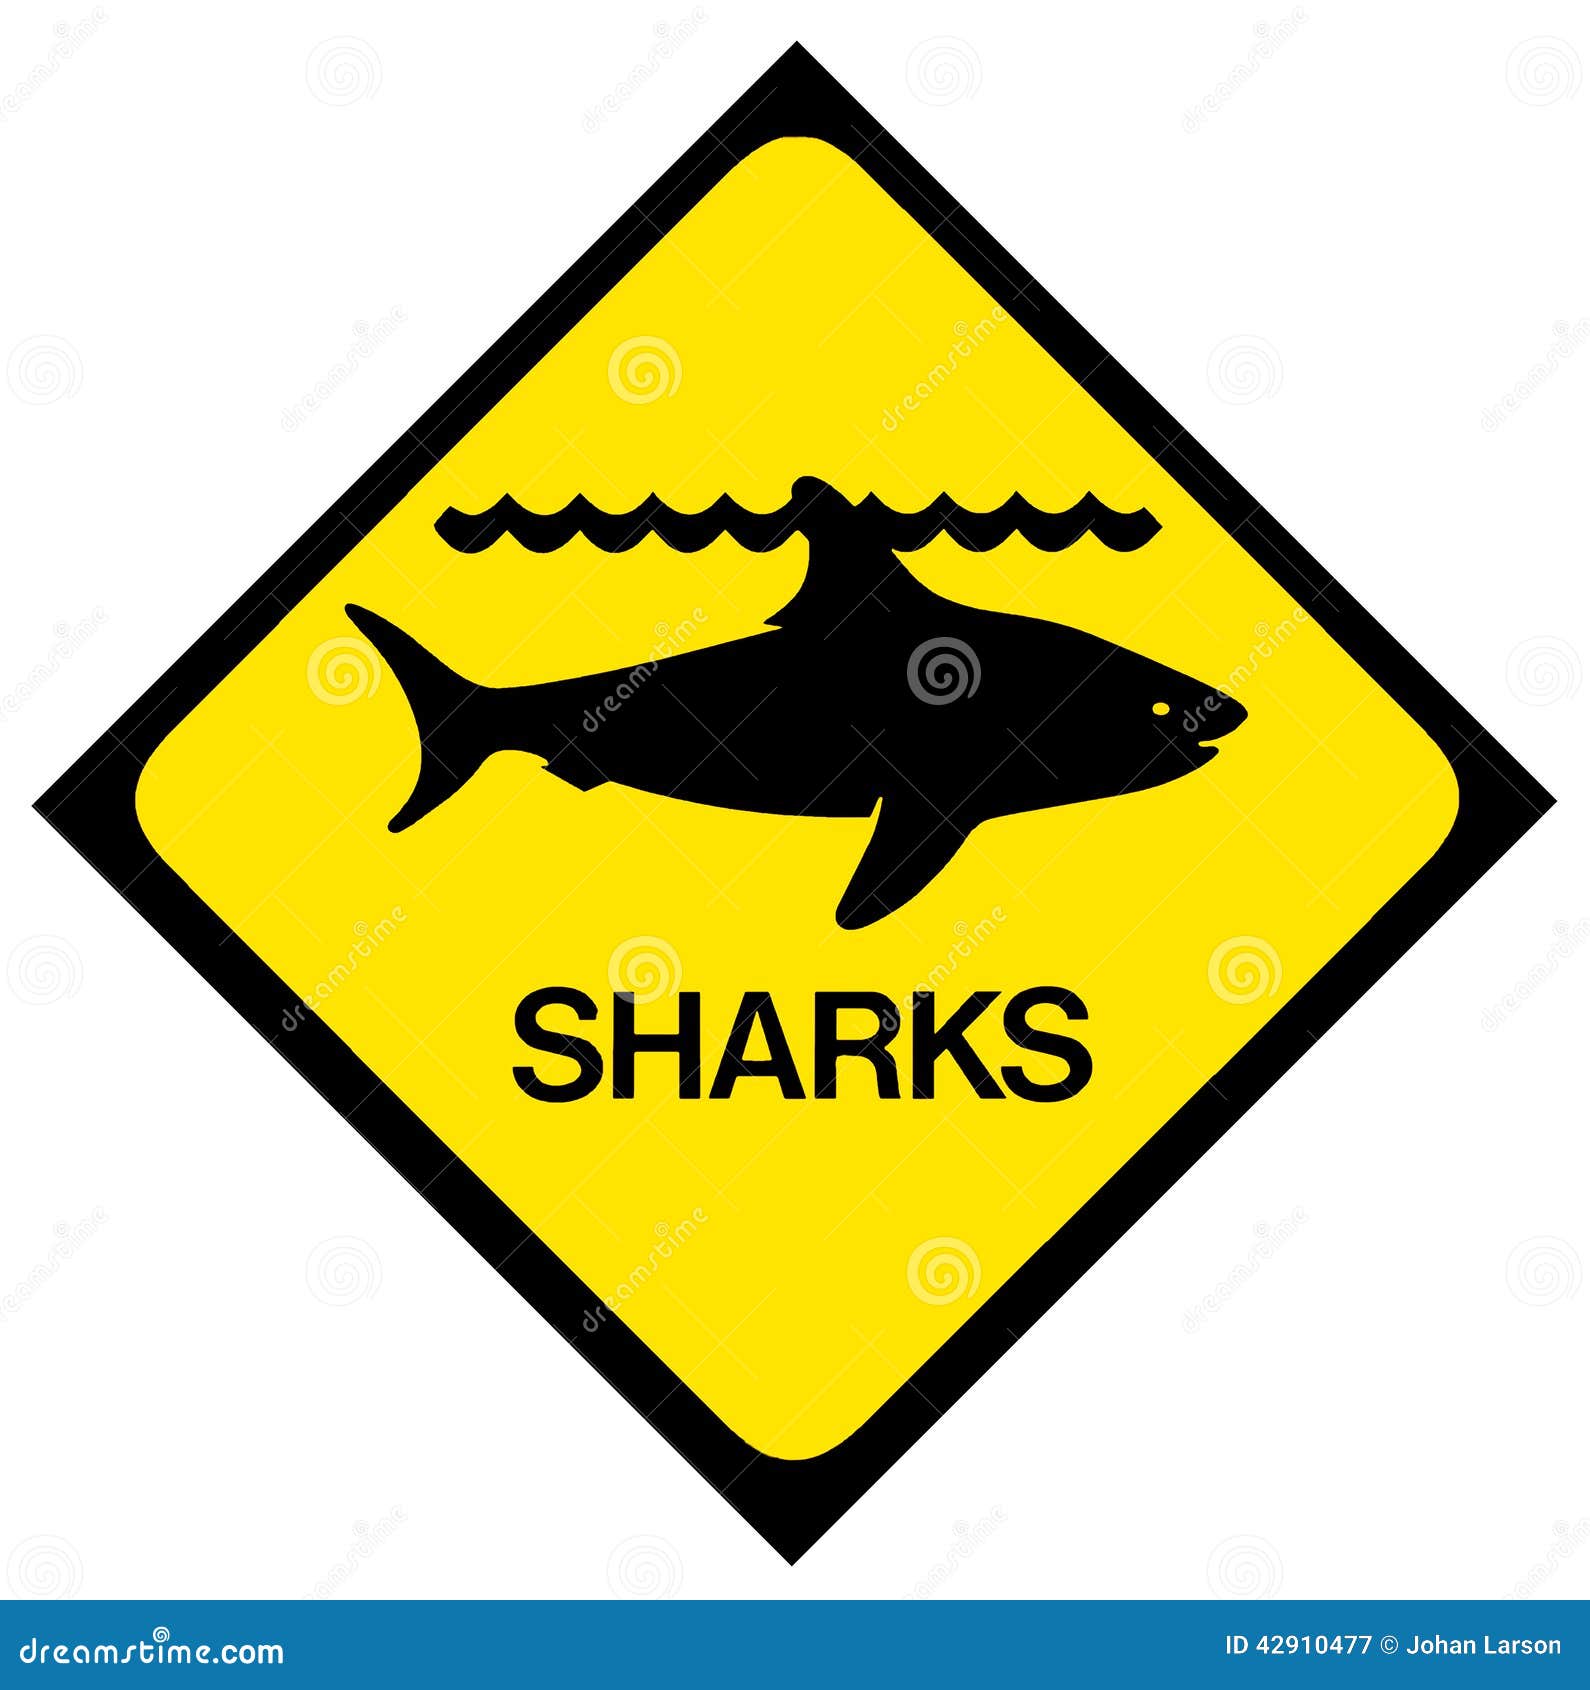 Shark Warning Sign In Yellow. Sharks, Danger, Keep Out Vector ...